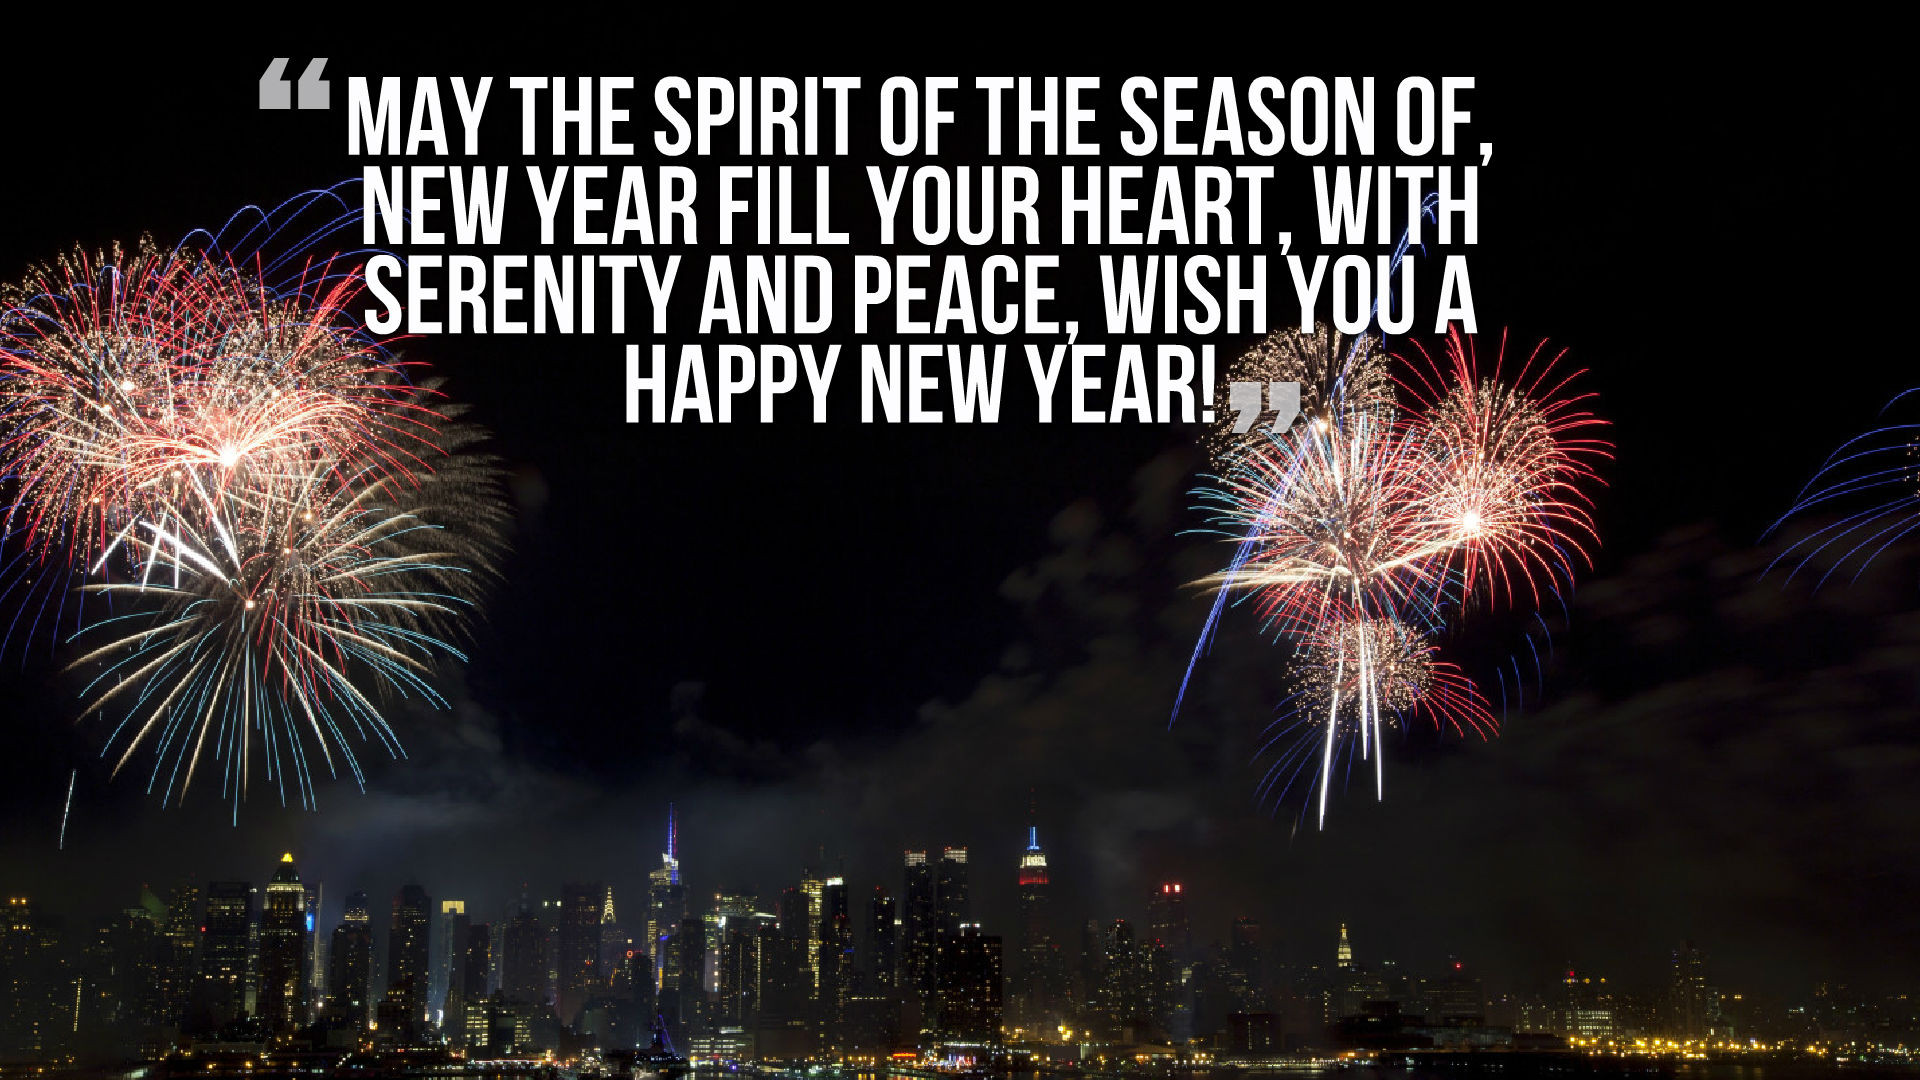 New Year Quotes 2020 Images
 Top 20 Happy New Years Eve Quotes 2020 on Evening